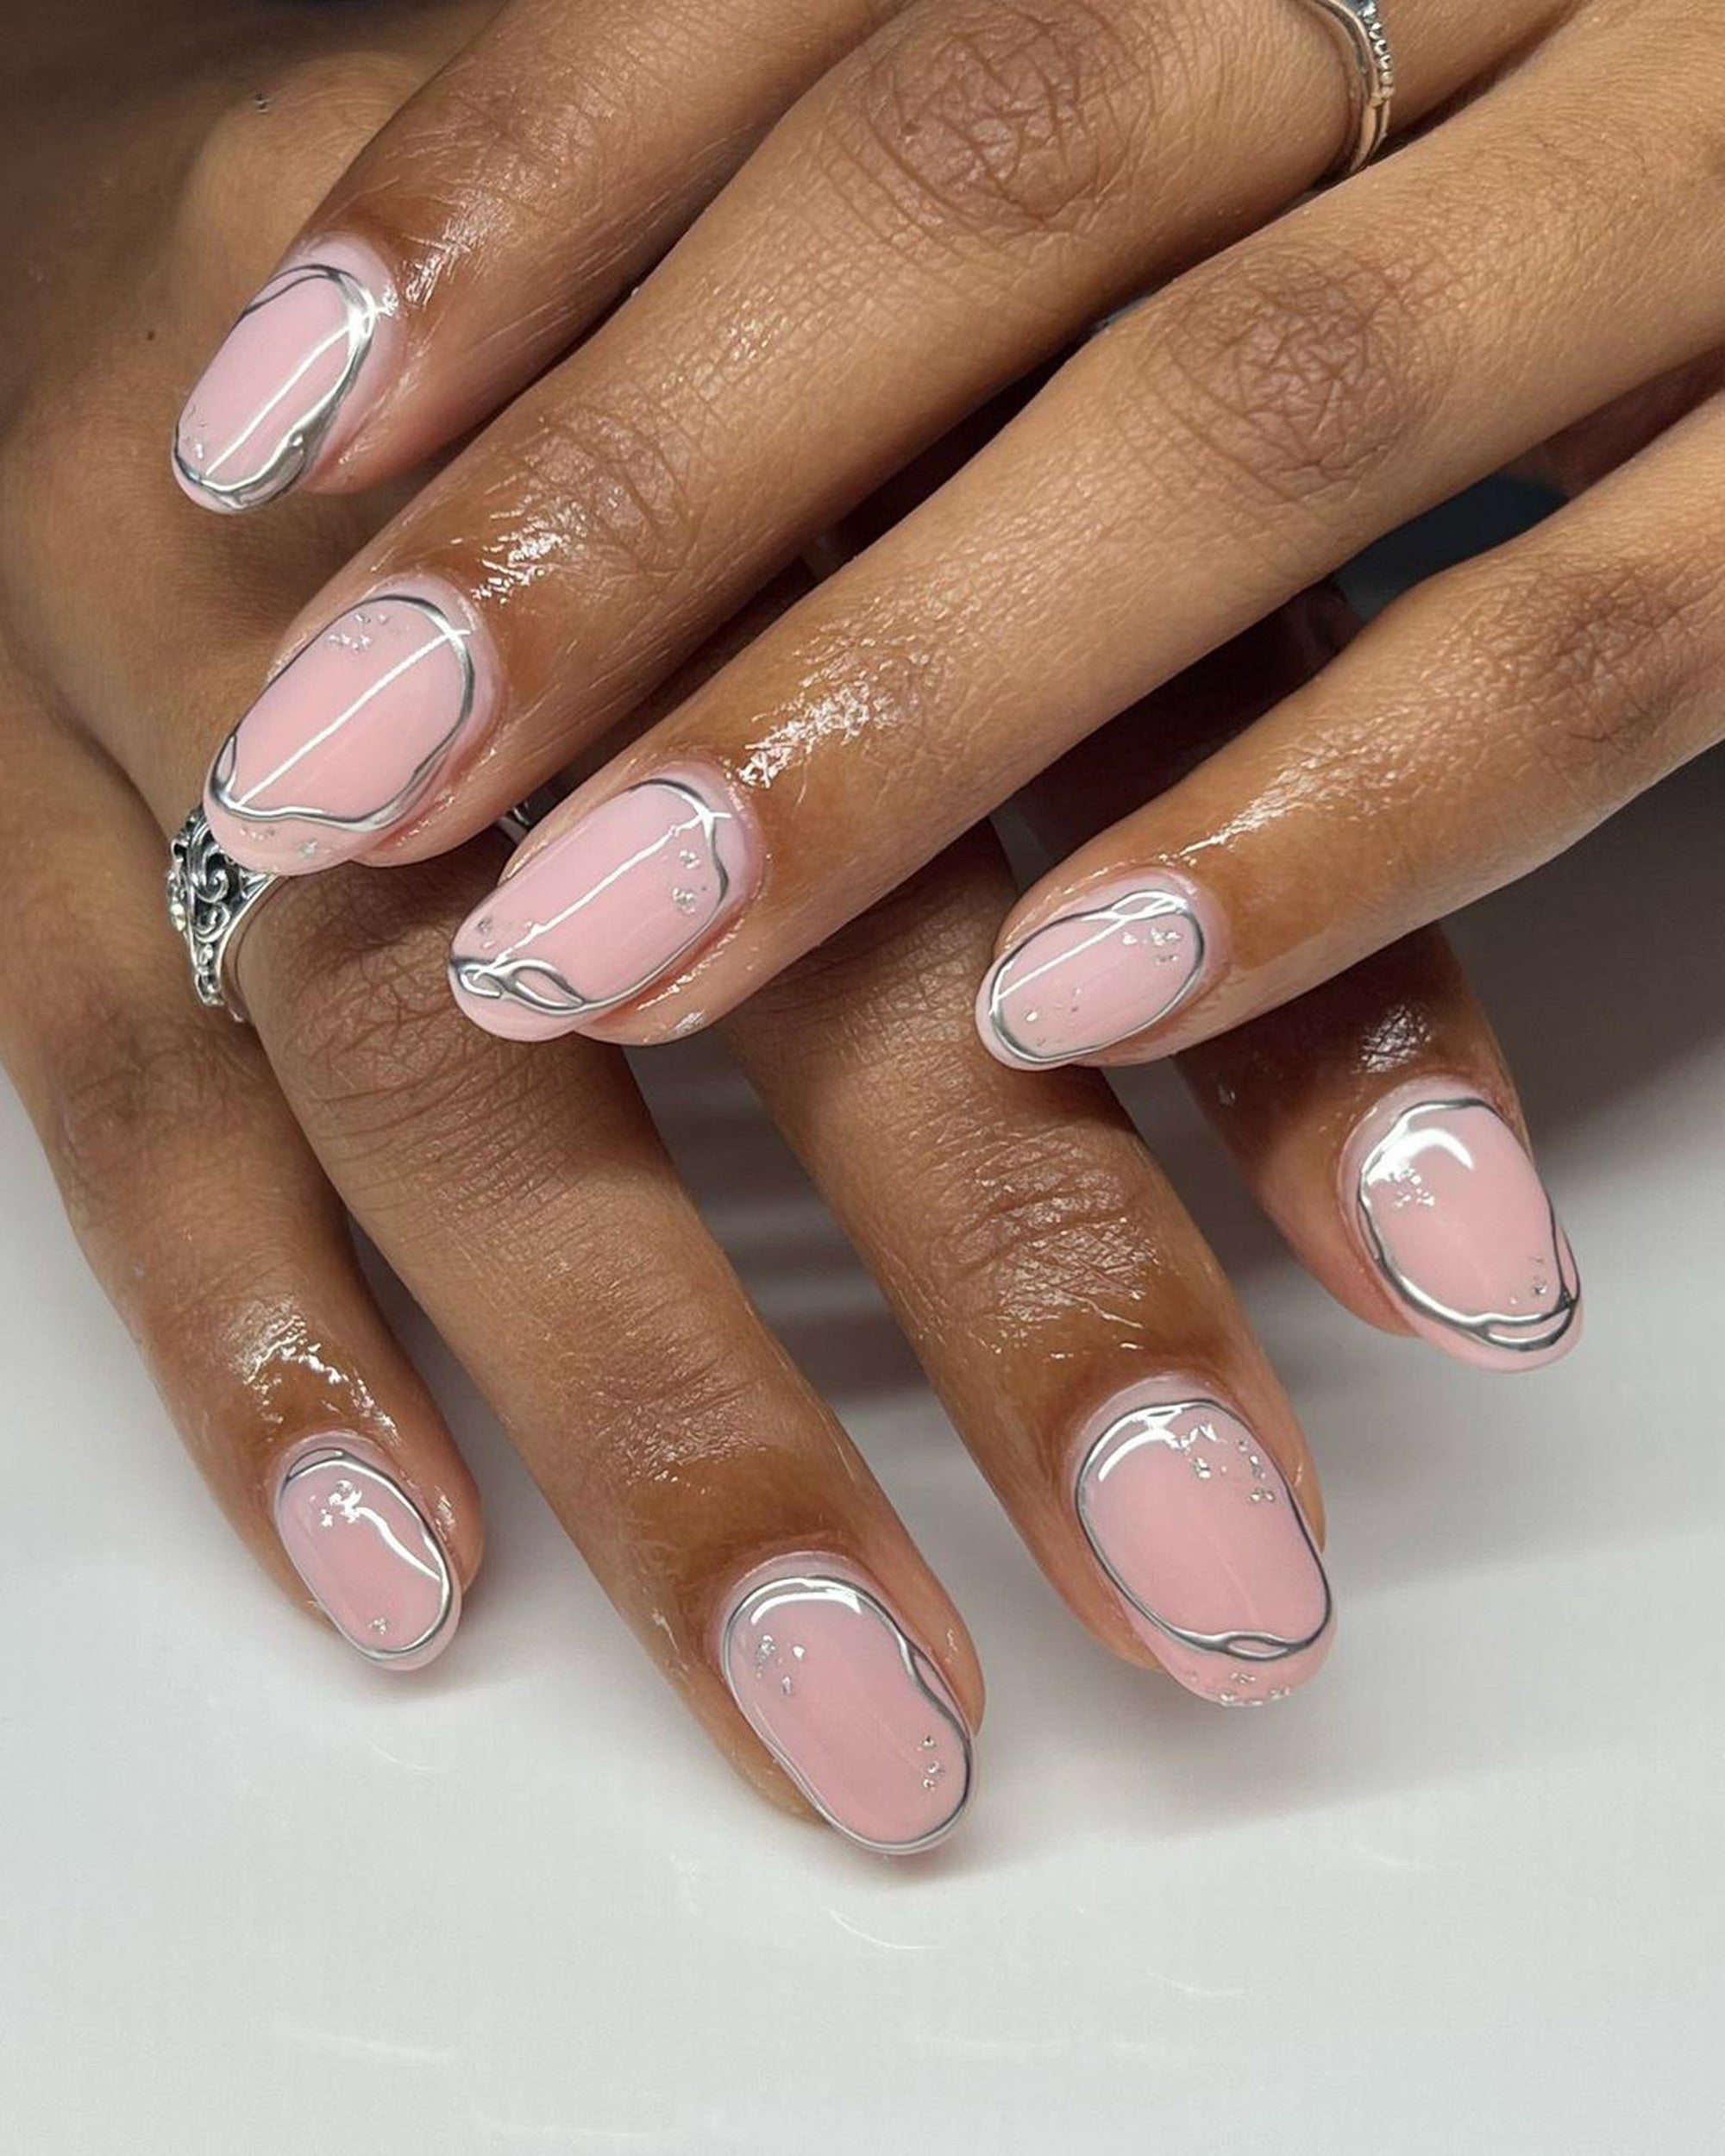 7 Cool LA Nail Trends Set To Take Over London Salons